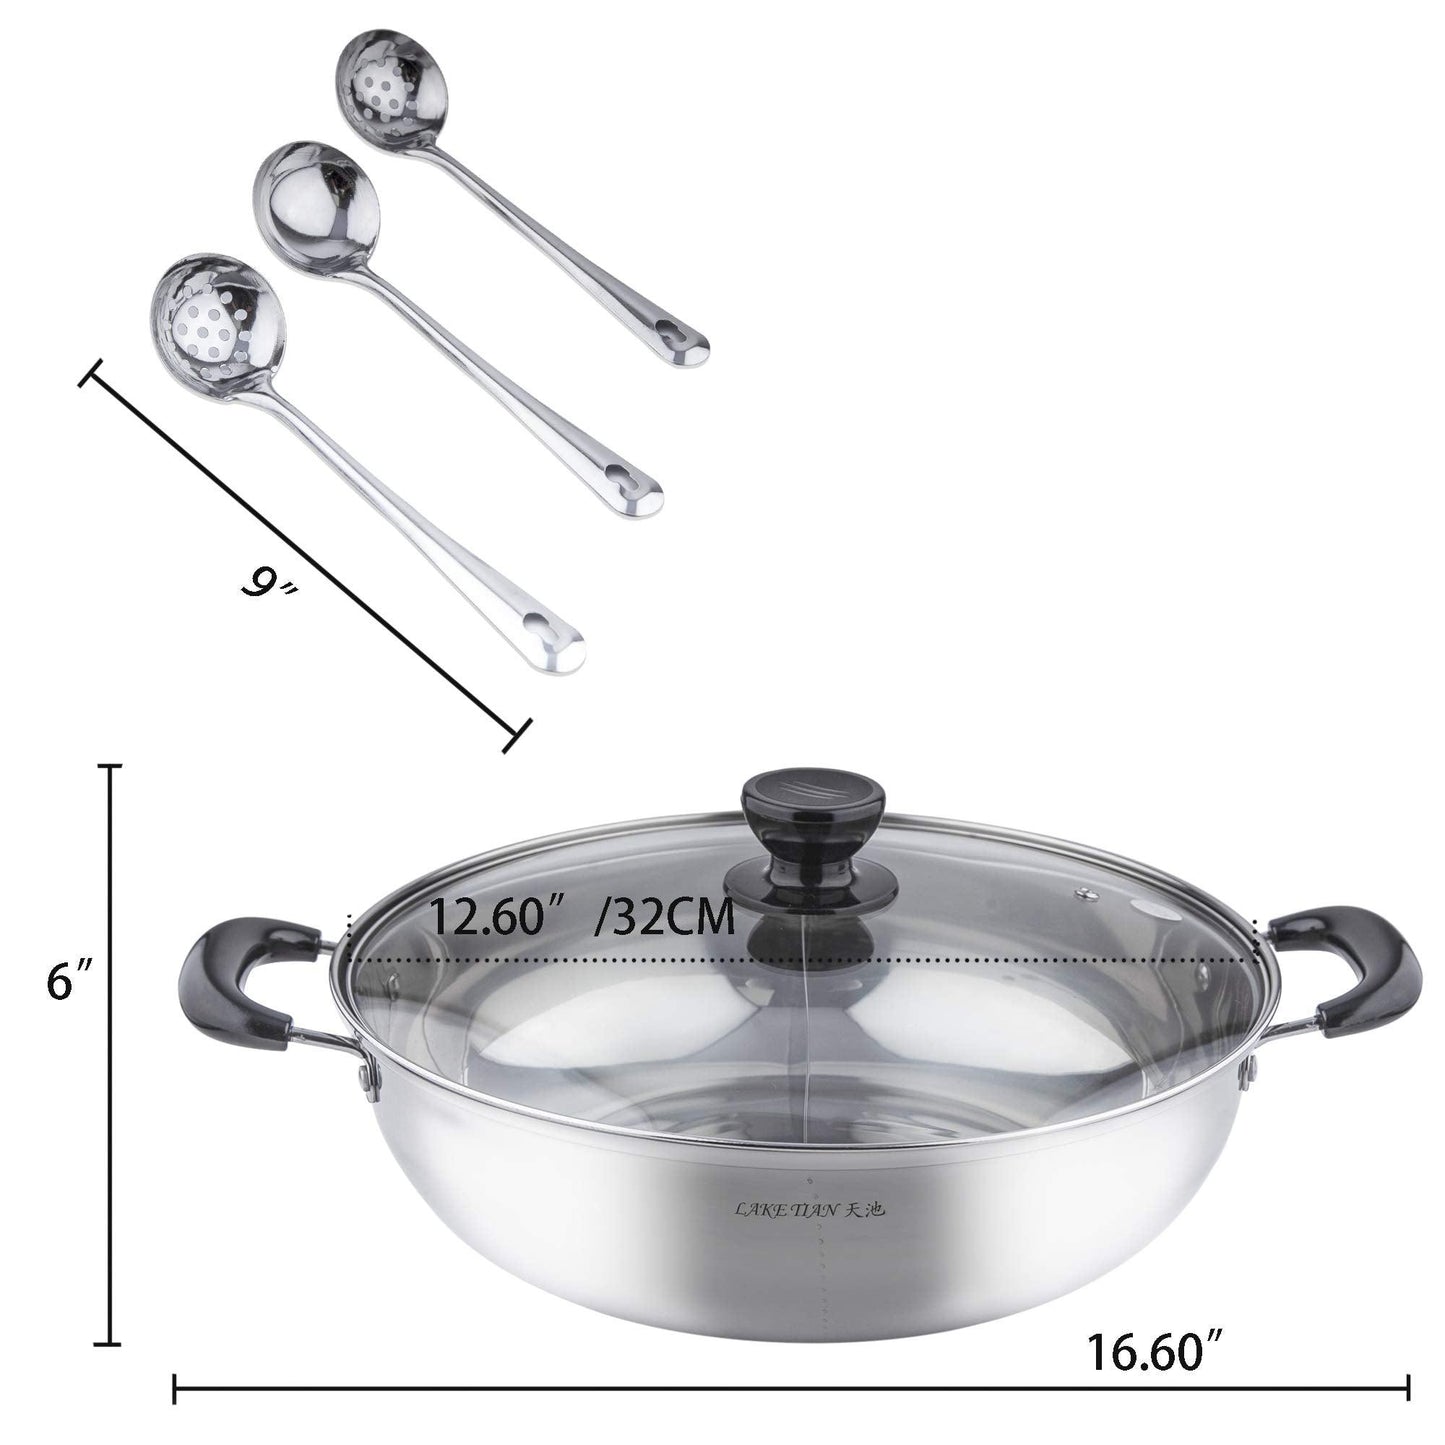 Lake Tian Stainless Steel Shabu Shabu Chinese Hot Pot With Lid, Dual Sided Yin Yang Hot Pot Pot with Divider Set Include 3 Pot Spoons, Divided Hotpot Pot, Portable, 鸳鸯火锅 (32cm/12.6″) - CookCave